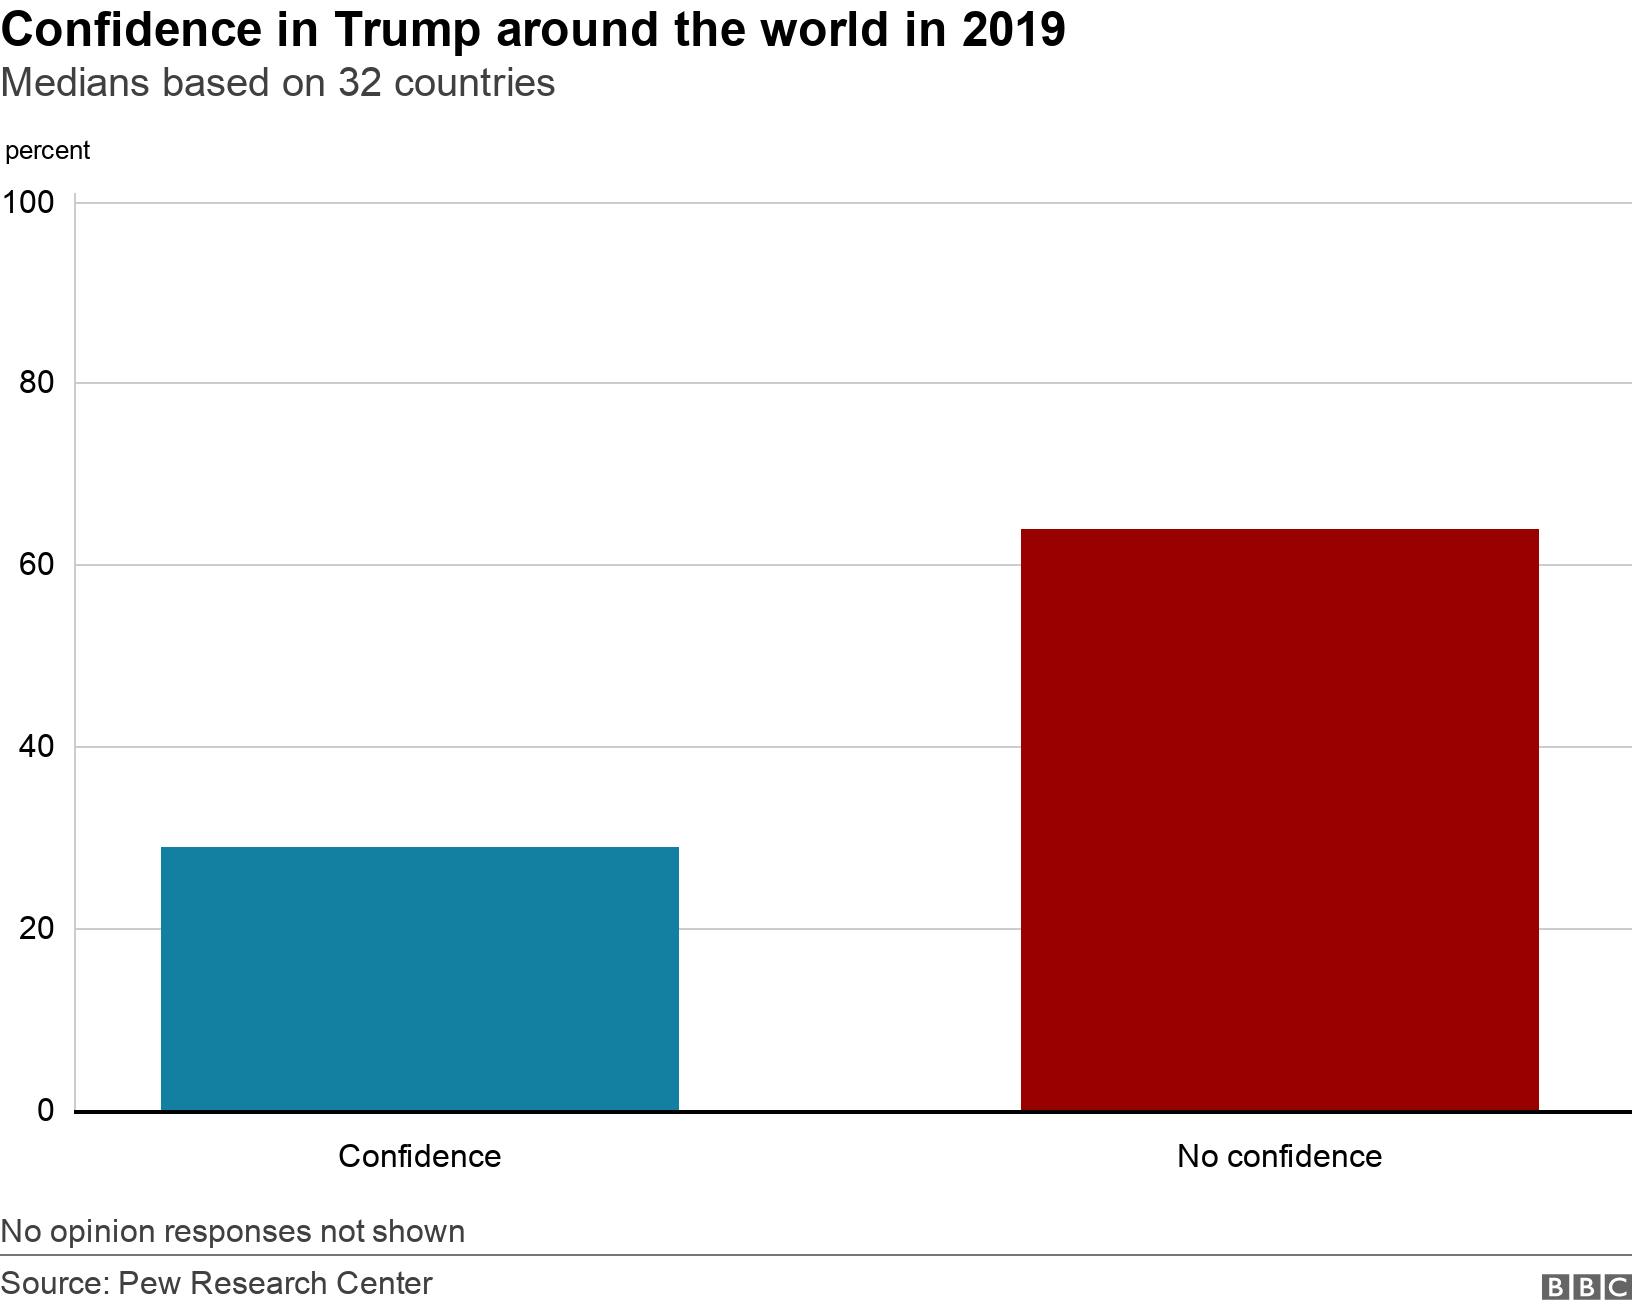 Confidence in Trump around the world in 2019. Medians based on 32 countries.  No opinion responses not shown.